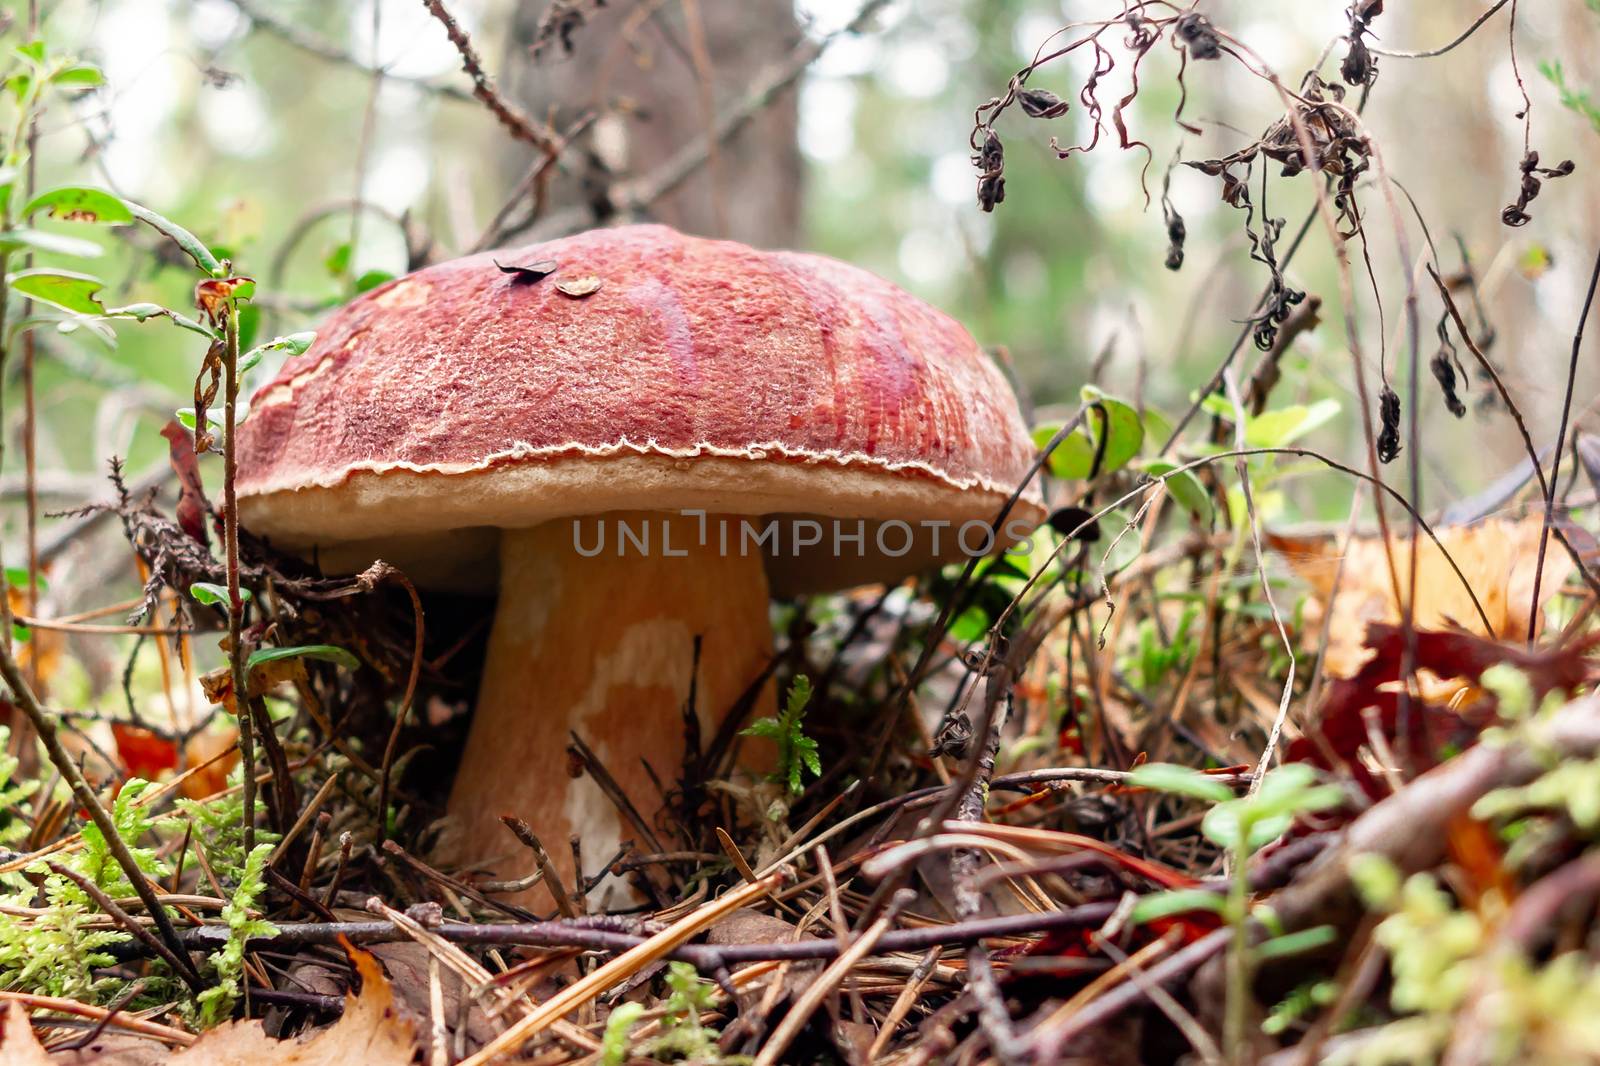 Edible boletus edulis mushroom, known as a penny bun or king bolete grows in a pine forest - image.